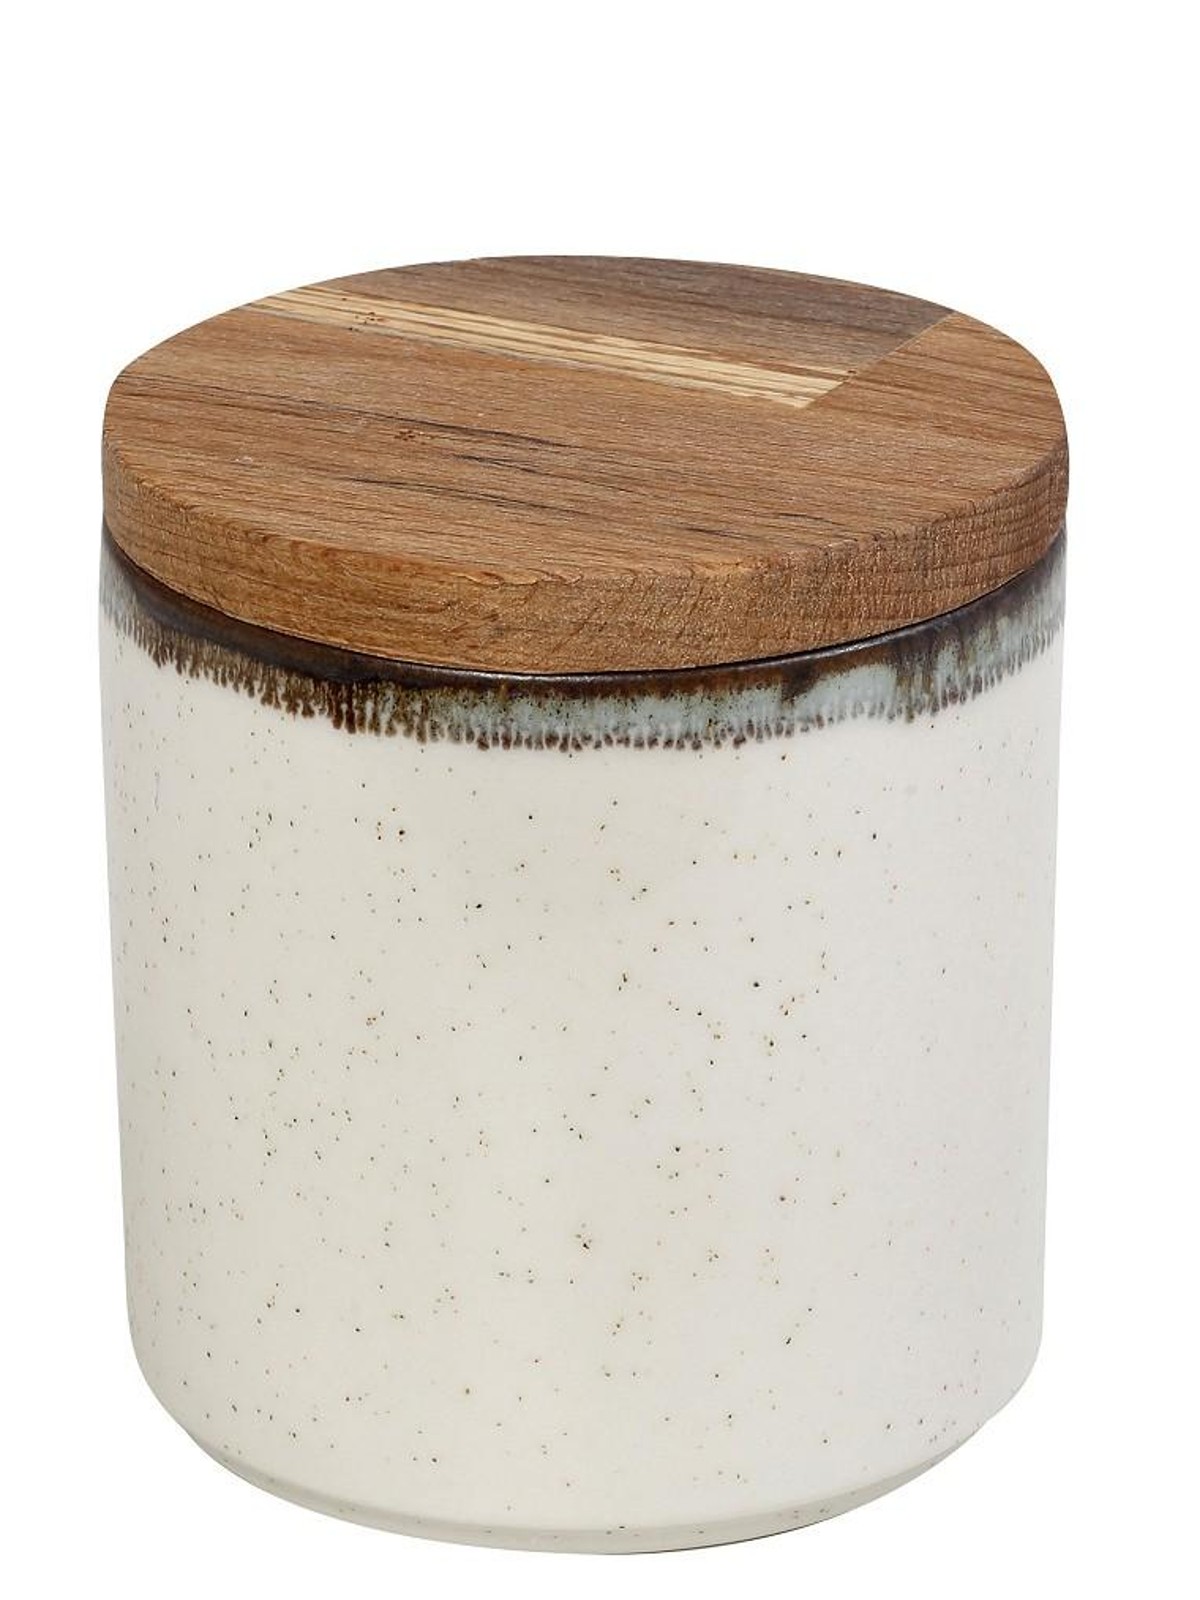 Ceramic container with wooden lid